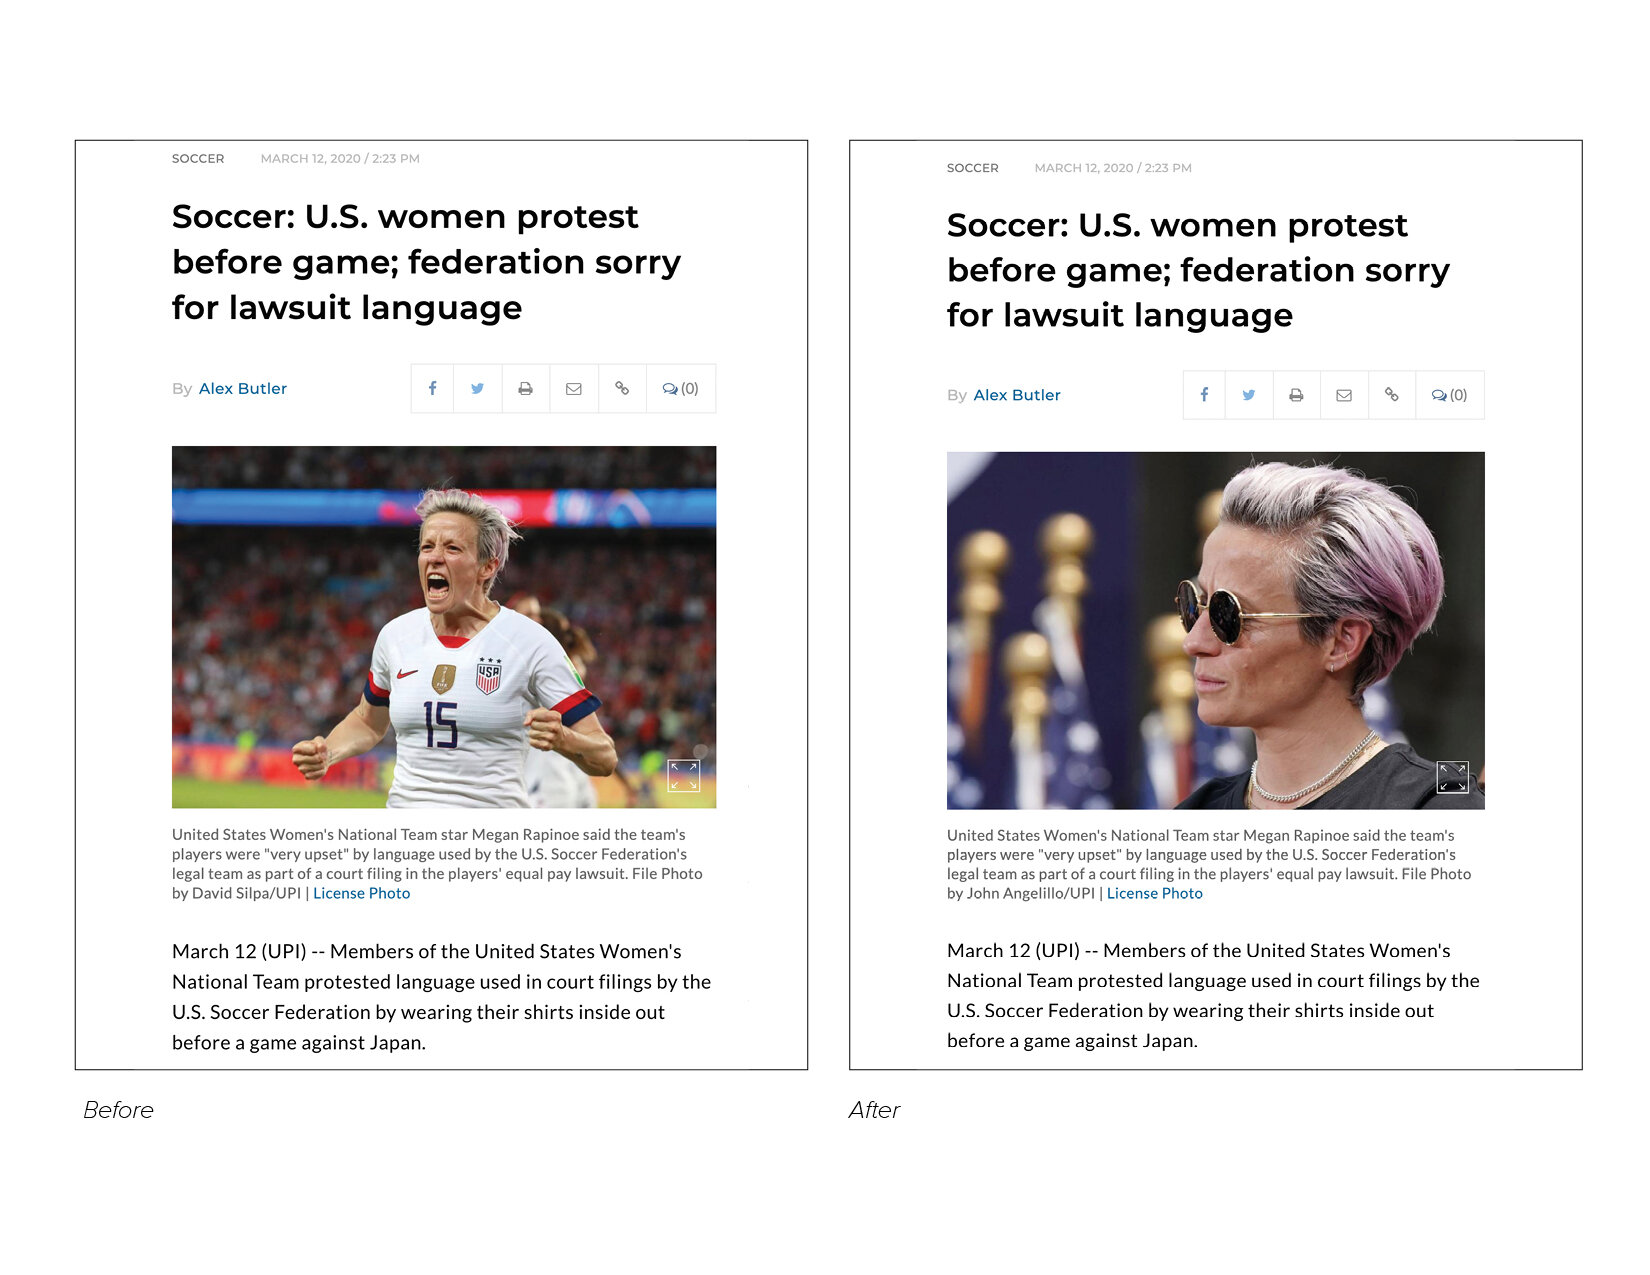  I approached the Sports Editor about swapping this image of U.S. Soccer player, Megan Rapinoe, in an effort to avoid perpetuating harmful stereotypes about angry women. 